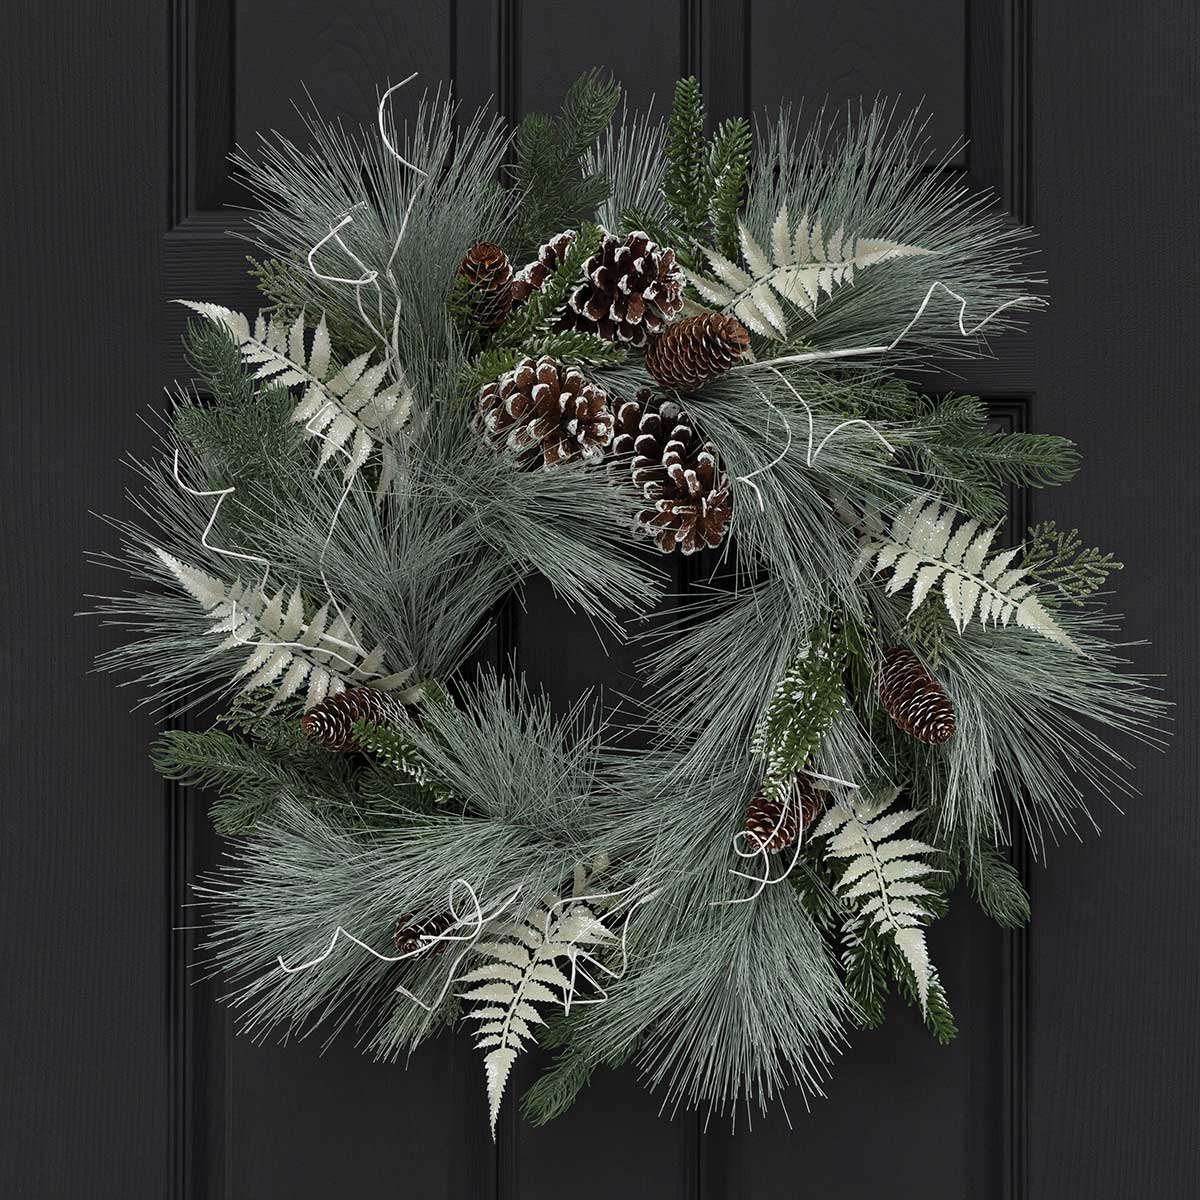 WREATH WINTER PINE WITH PINECONES 24IN (INNER RING 9IN) - Click Image to Close